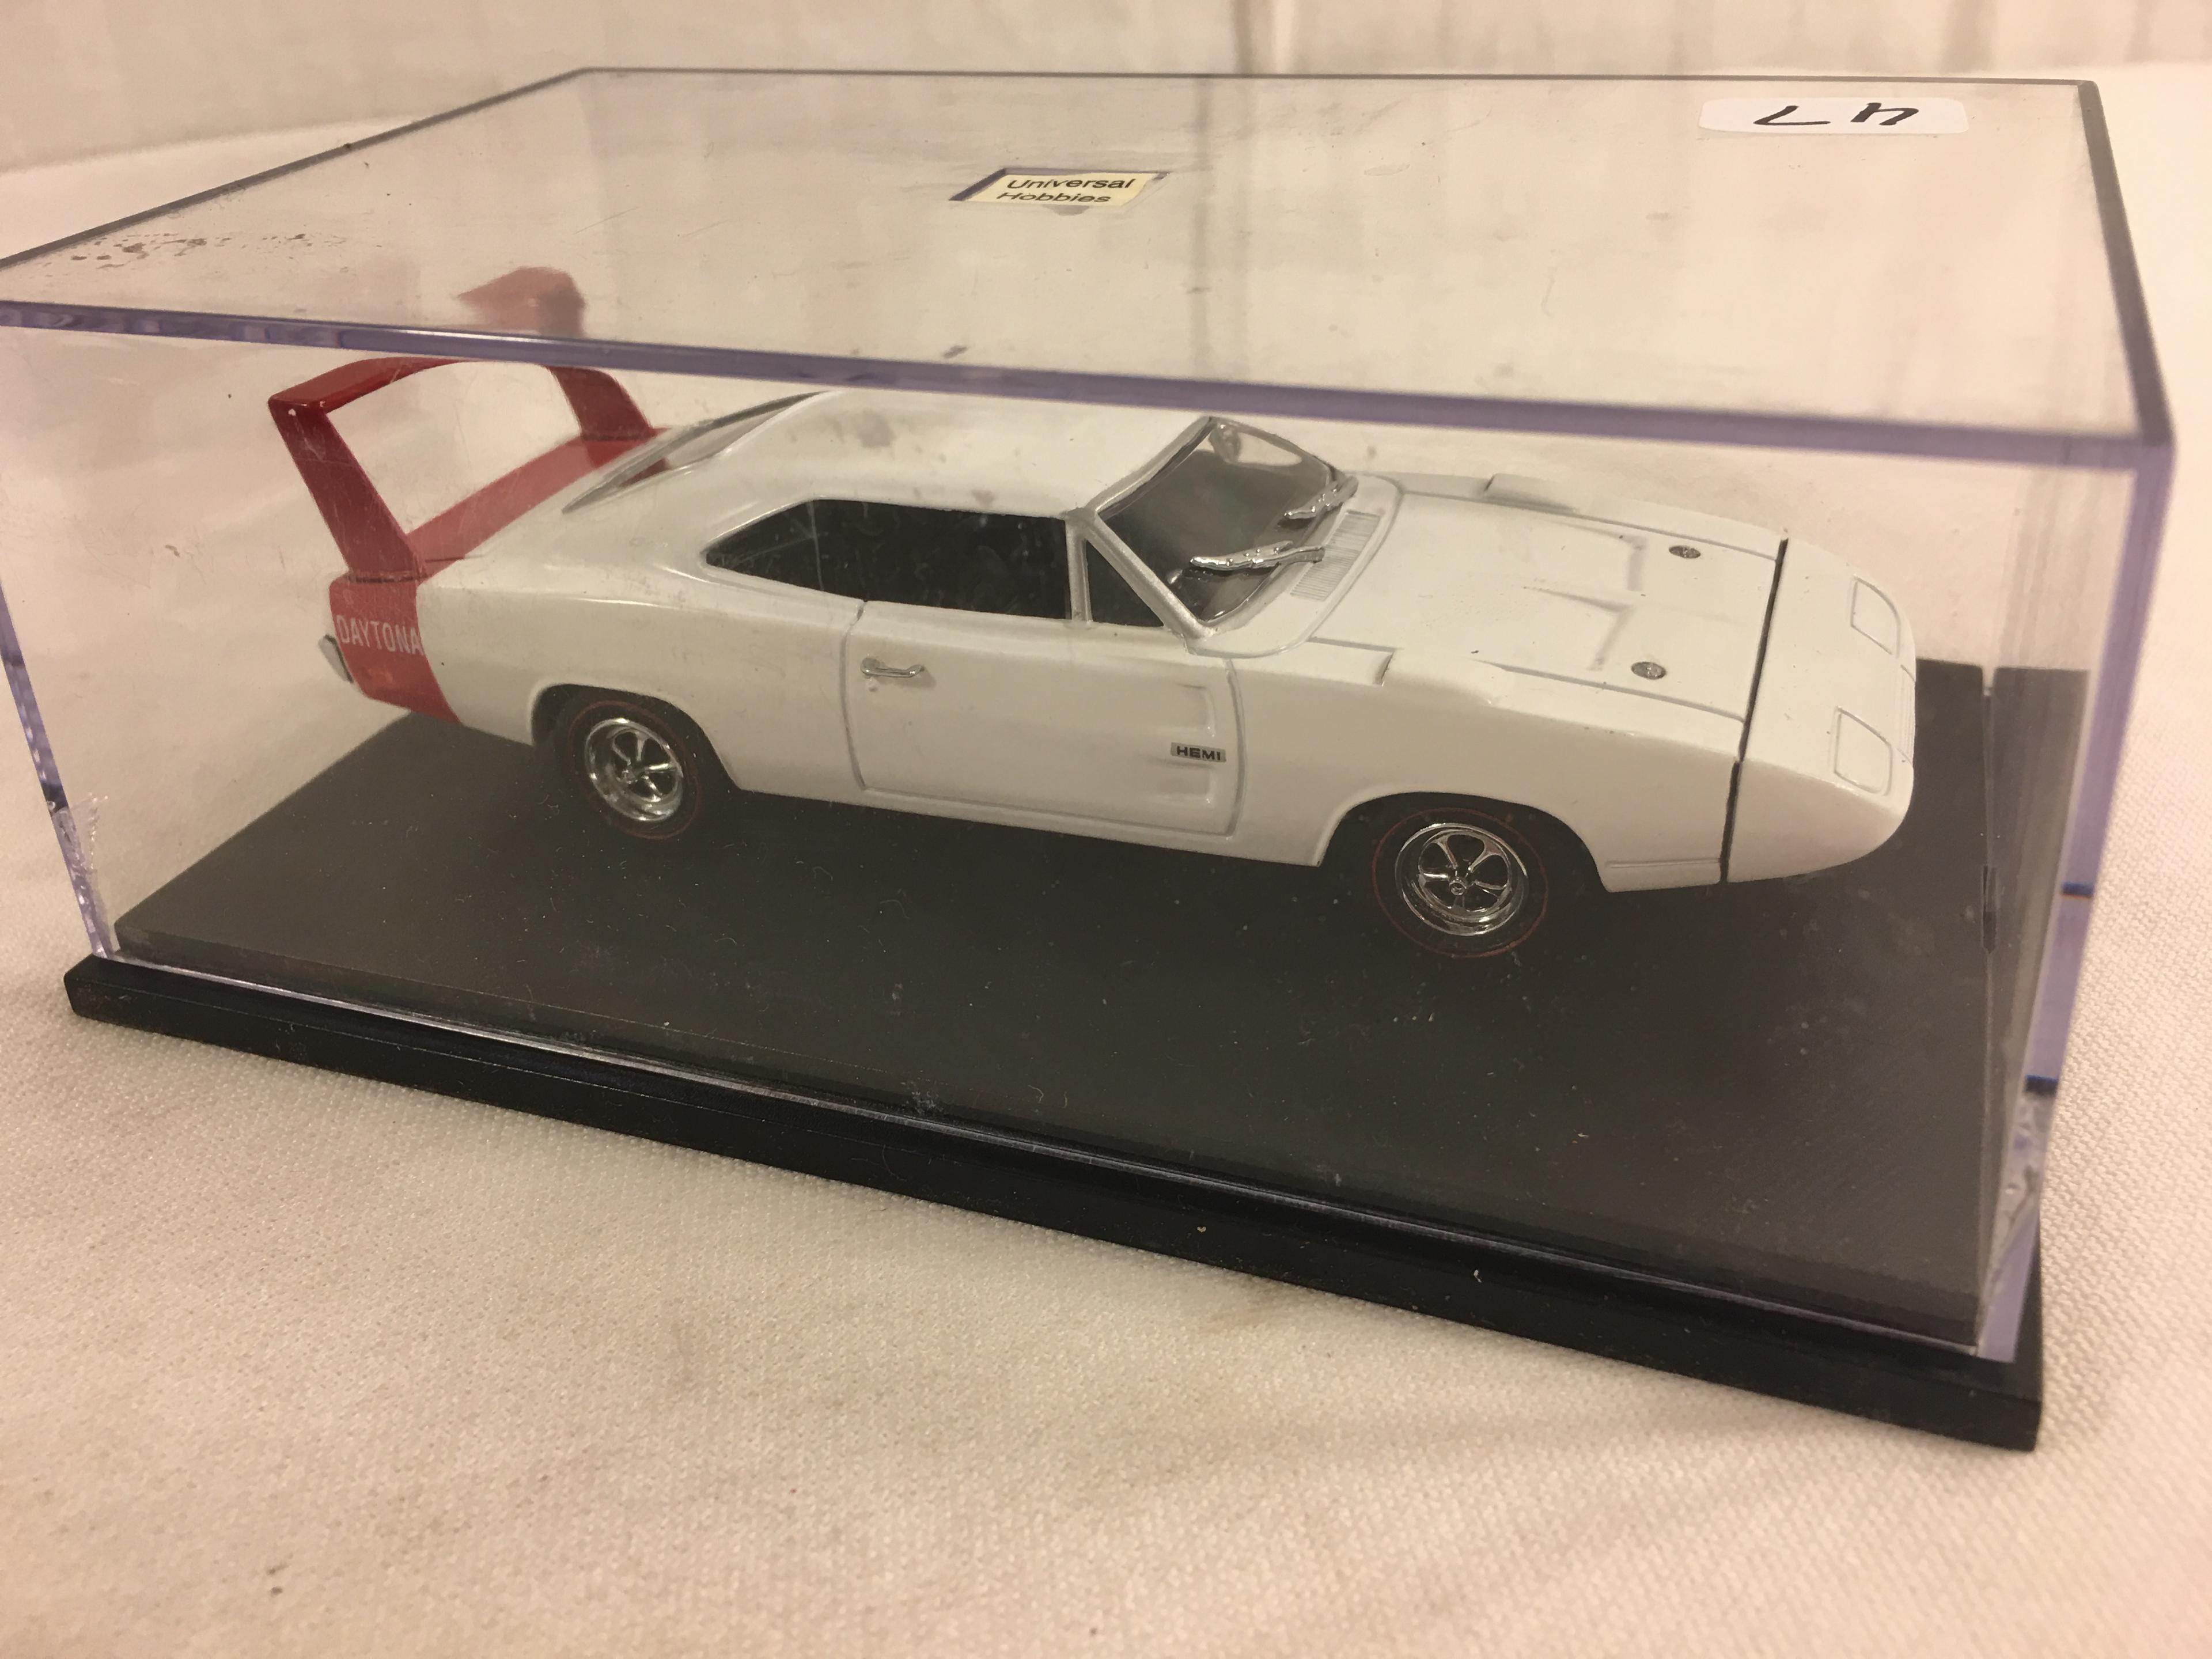 Collector Universal Hobbies 1969 Dodge Charger Daytona 1:43 Scale white/Red Color DieCast car